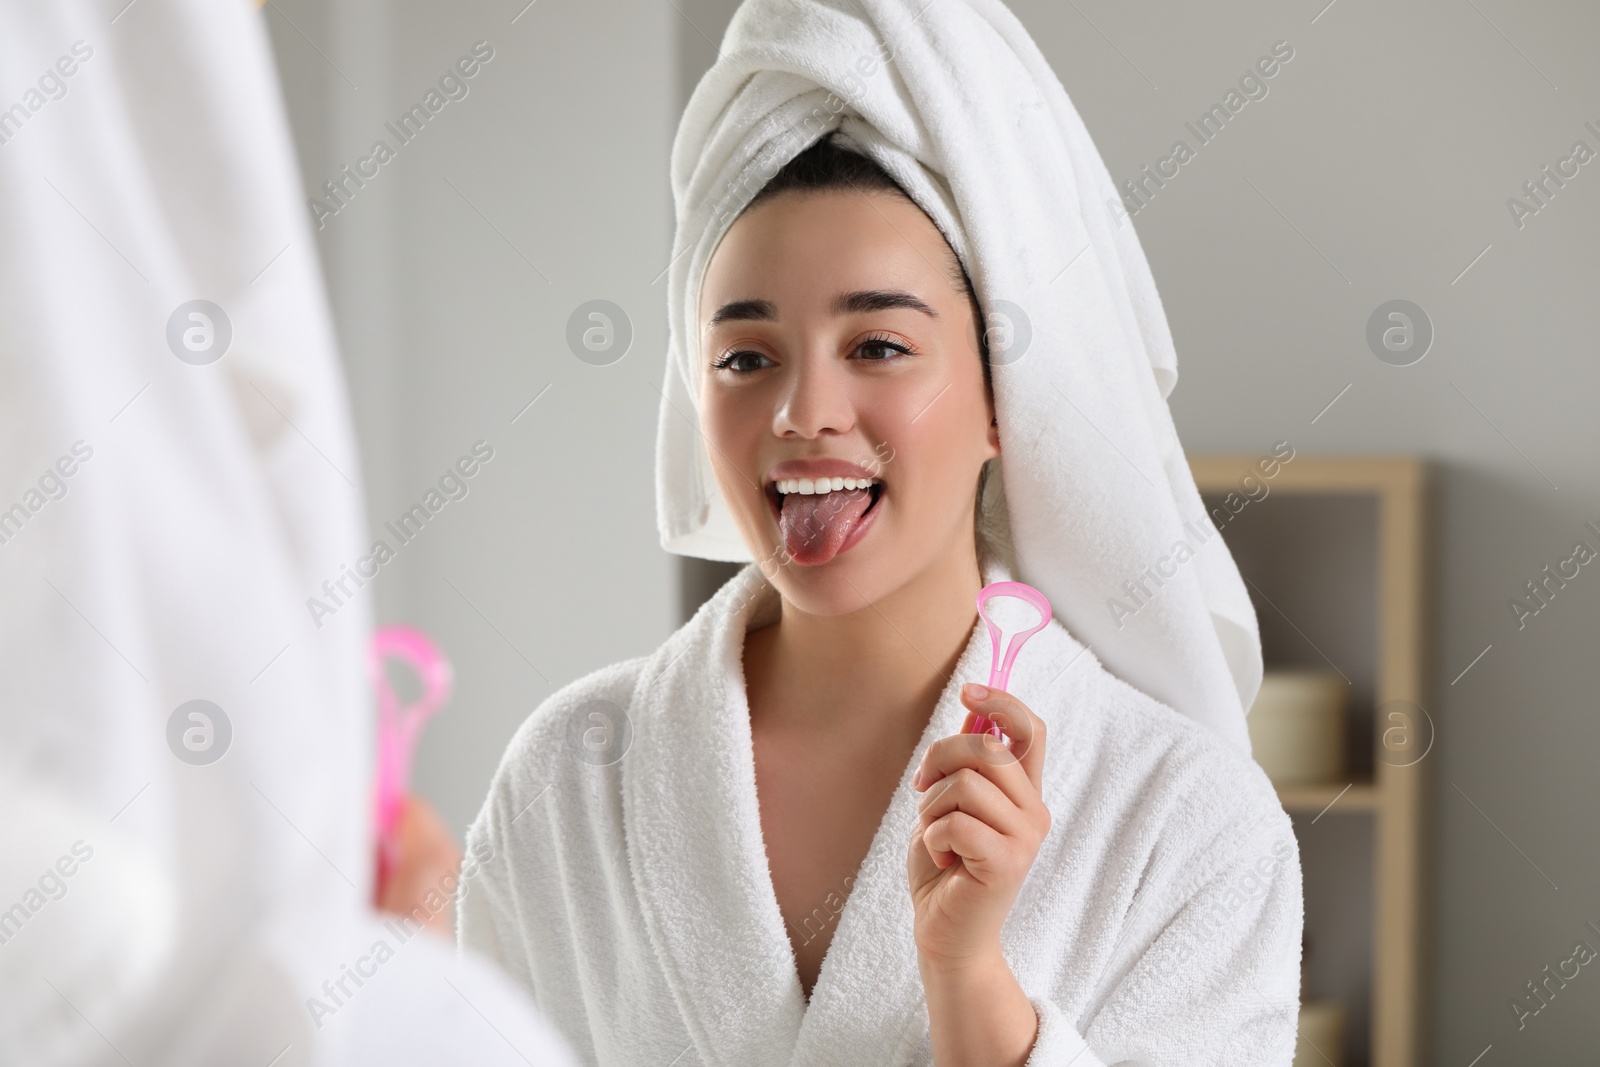 Photo of Happy woman with tongue cleaner near mirror in bathroom